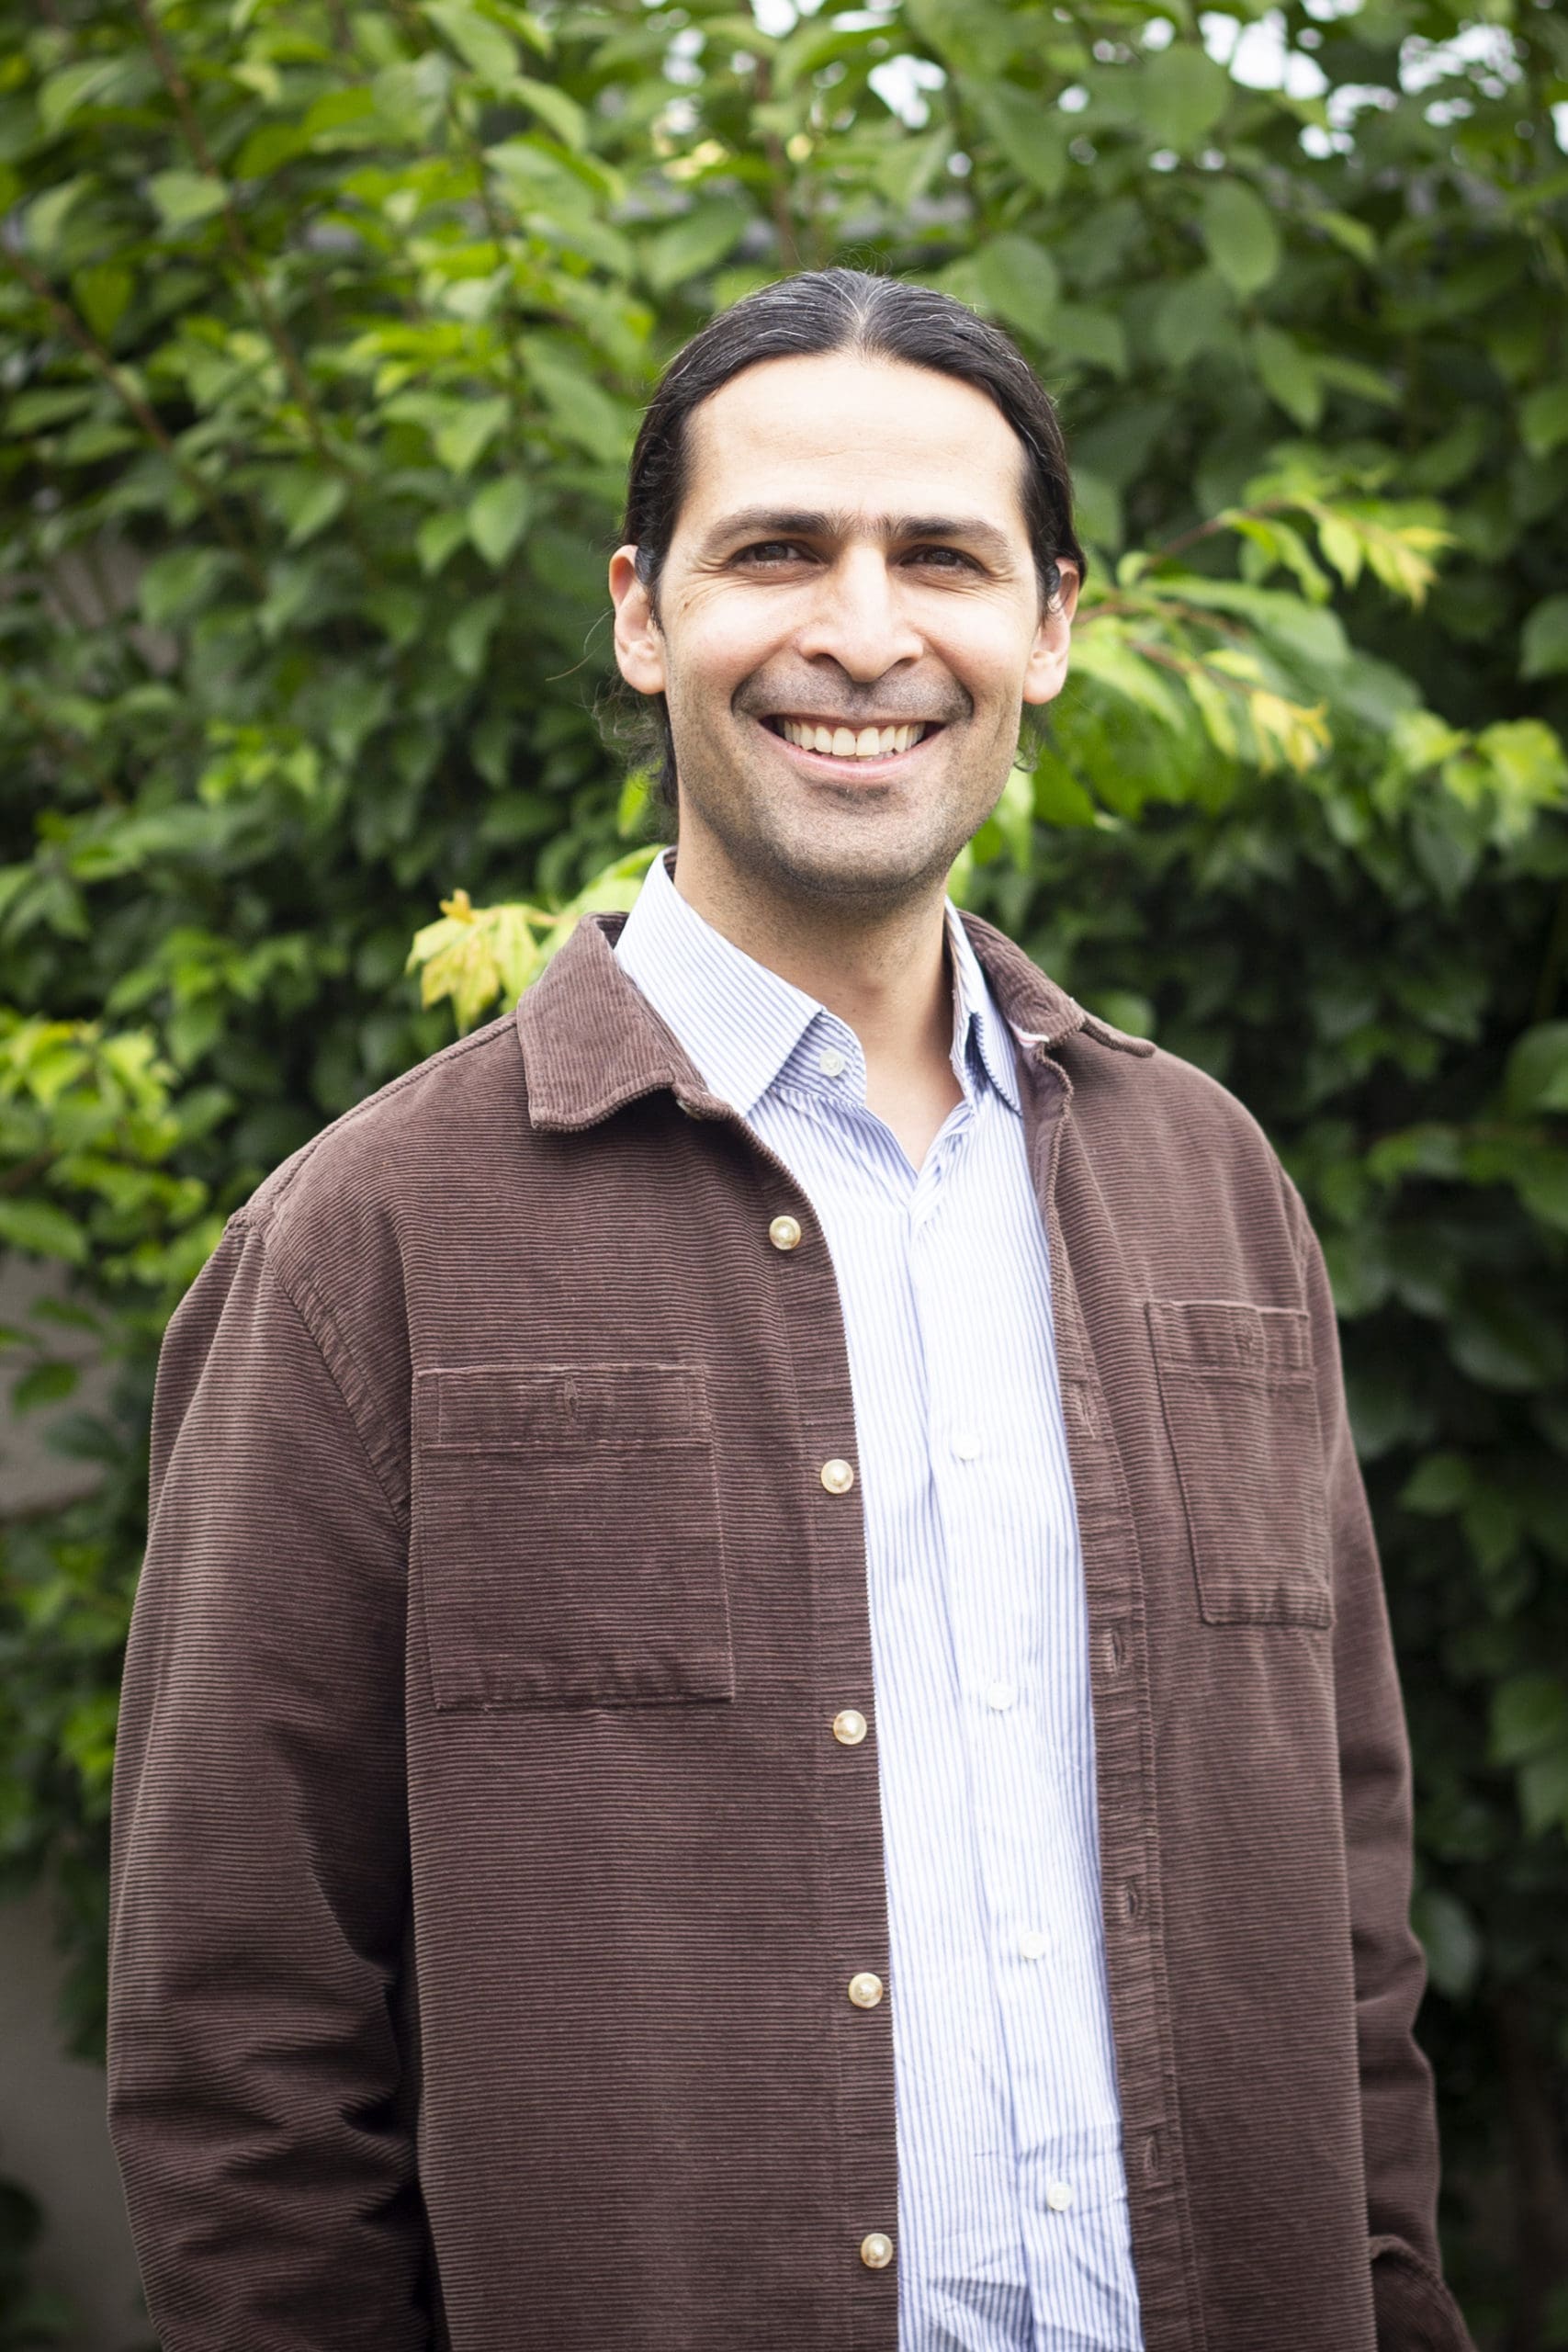 Headshot of José Aranda smiling with a brown jacket on standing in front of greenery outside